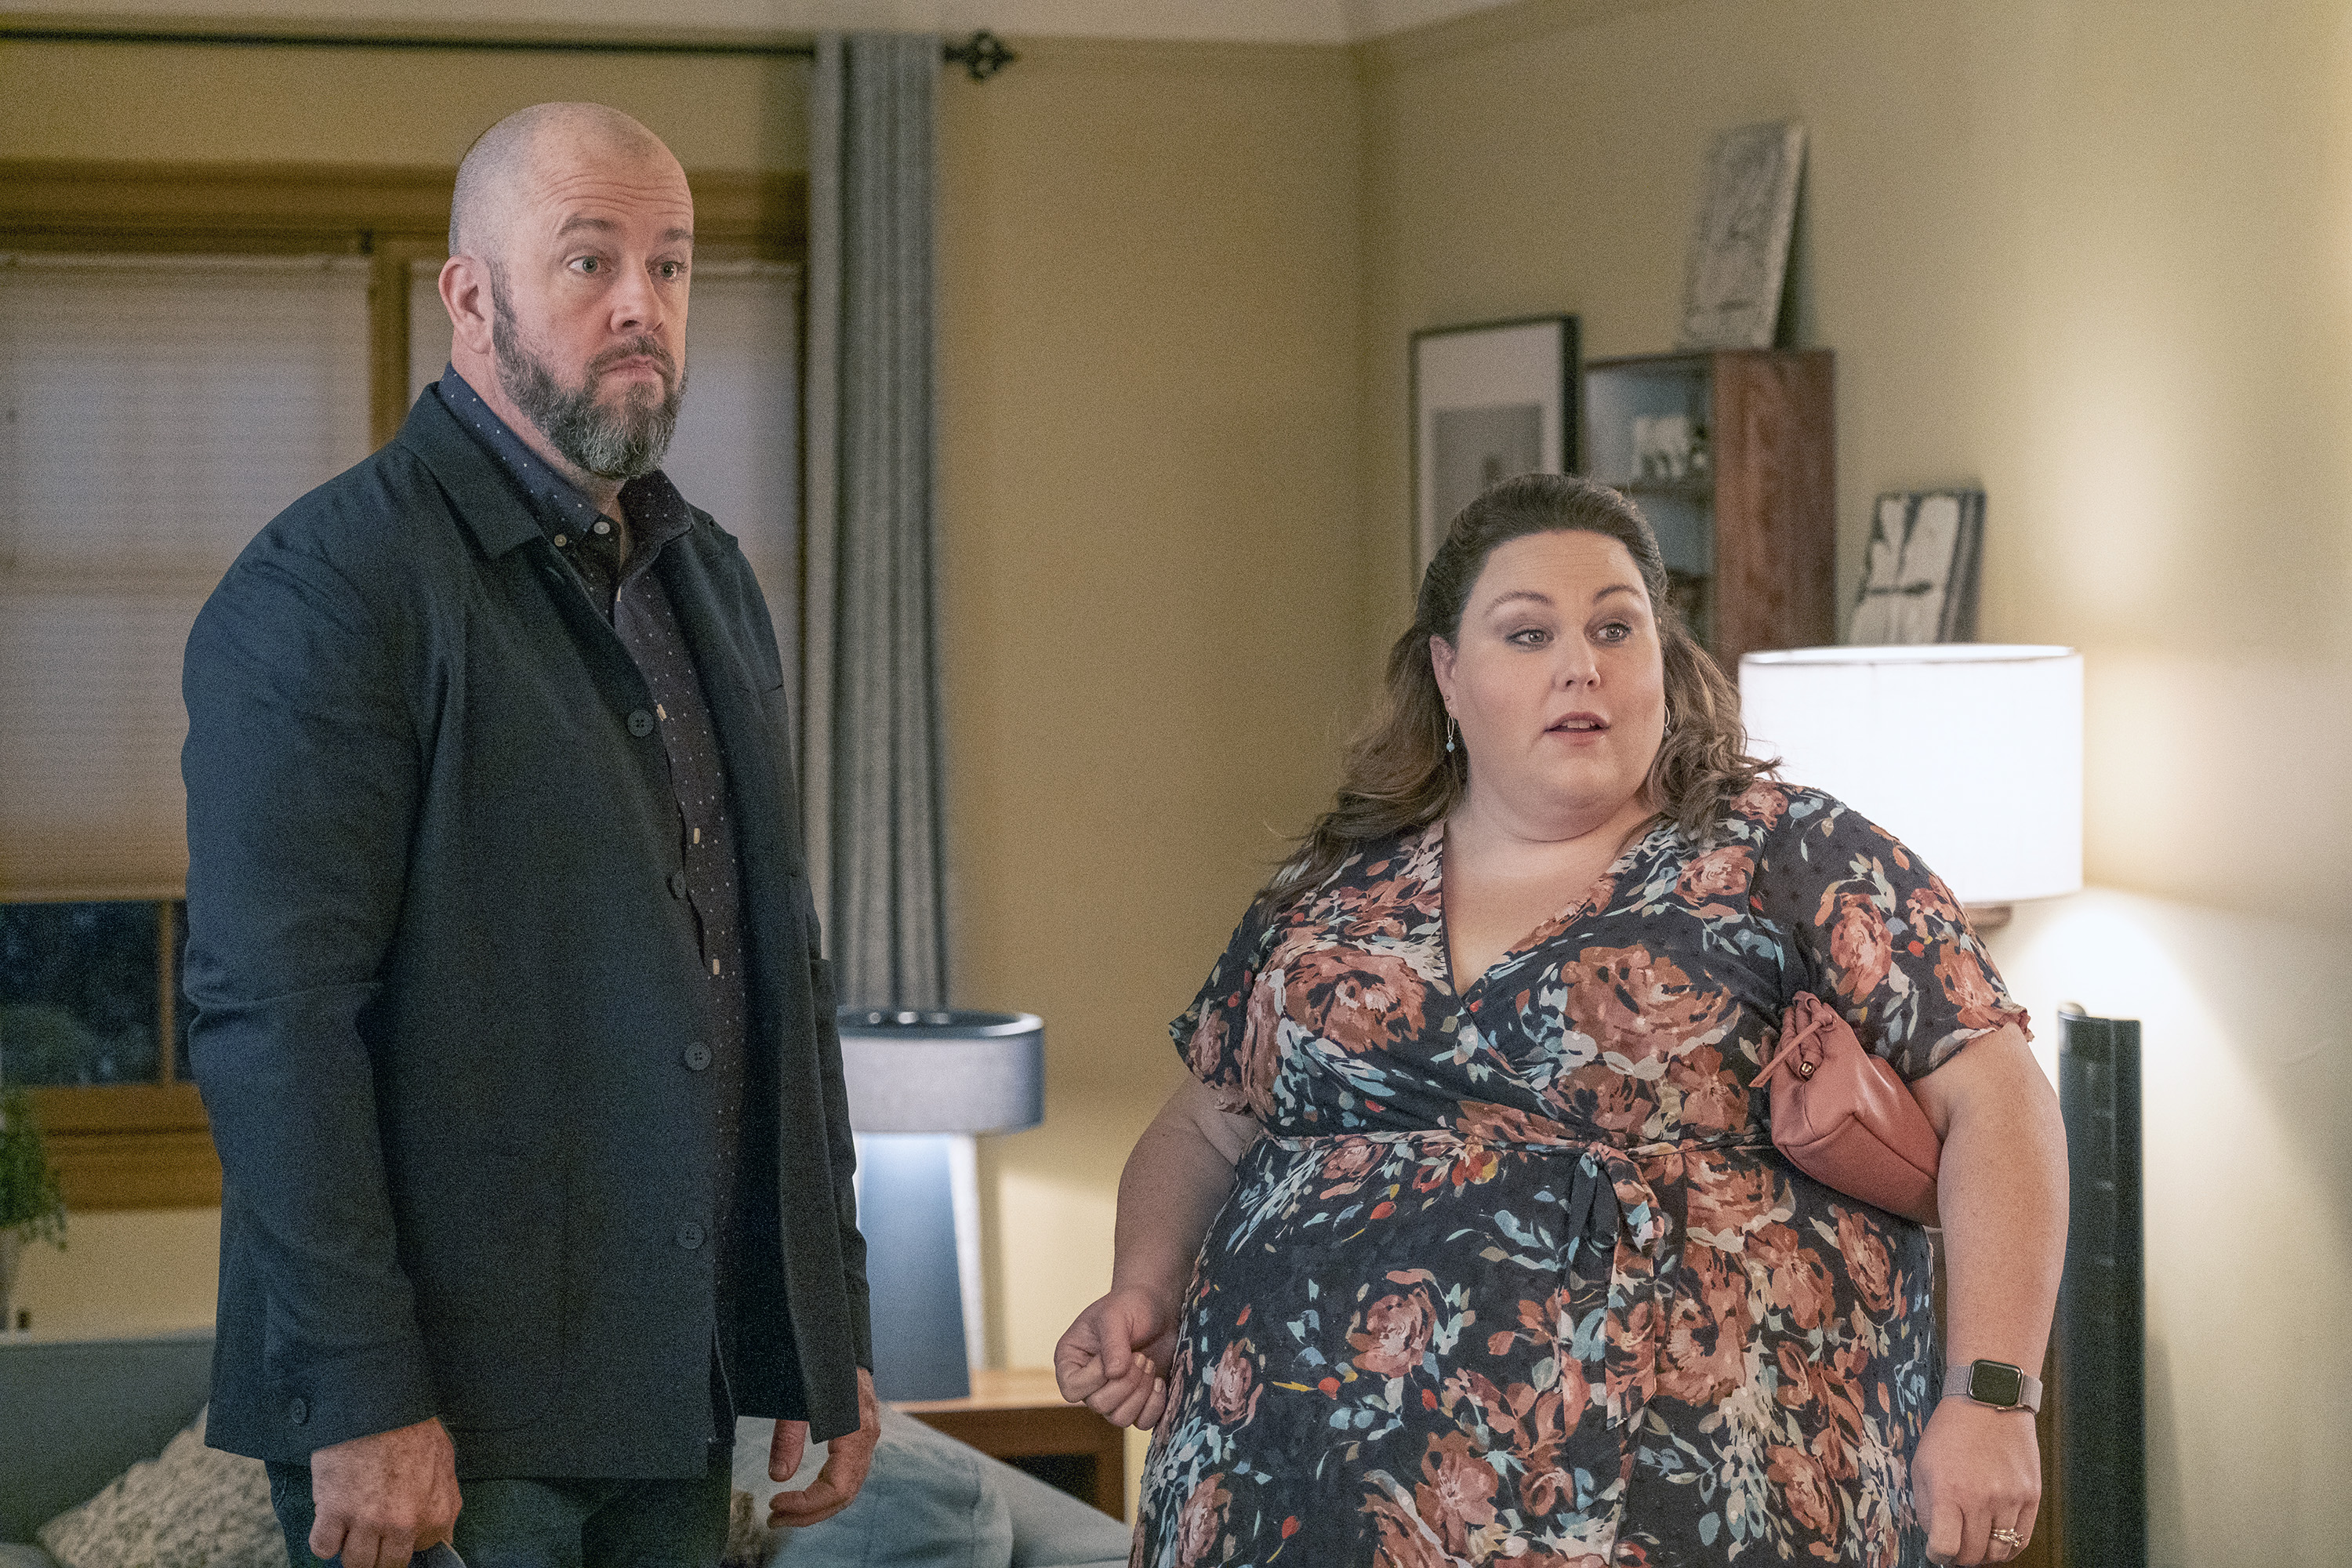 Chris Sullivan and Chrissy Metz, who play Toby and Kate in 'This Is Us' Season 6 Episode 9, share a scene. Toby wears a black jacket over a dark blue button-up shirt with white polka dots and jeans. Kate wears a dark blue short-sleeved dress with dark pink roses on it.